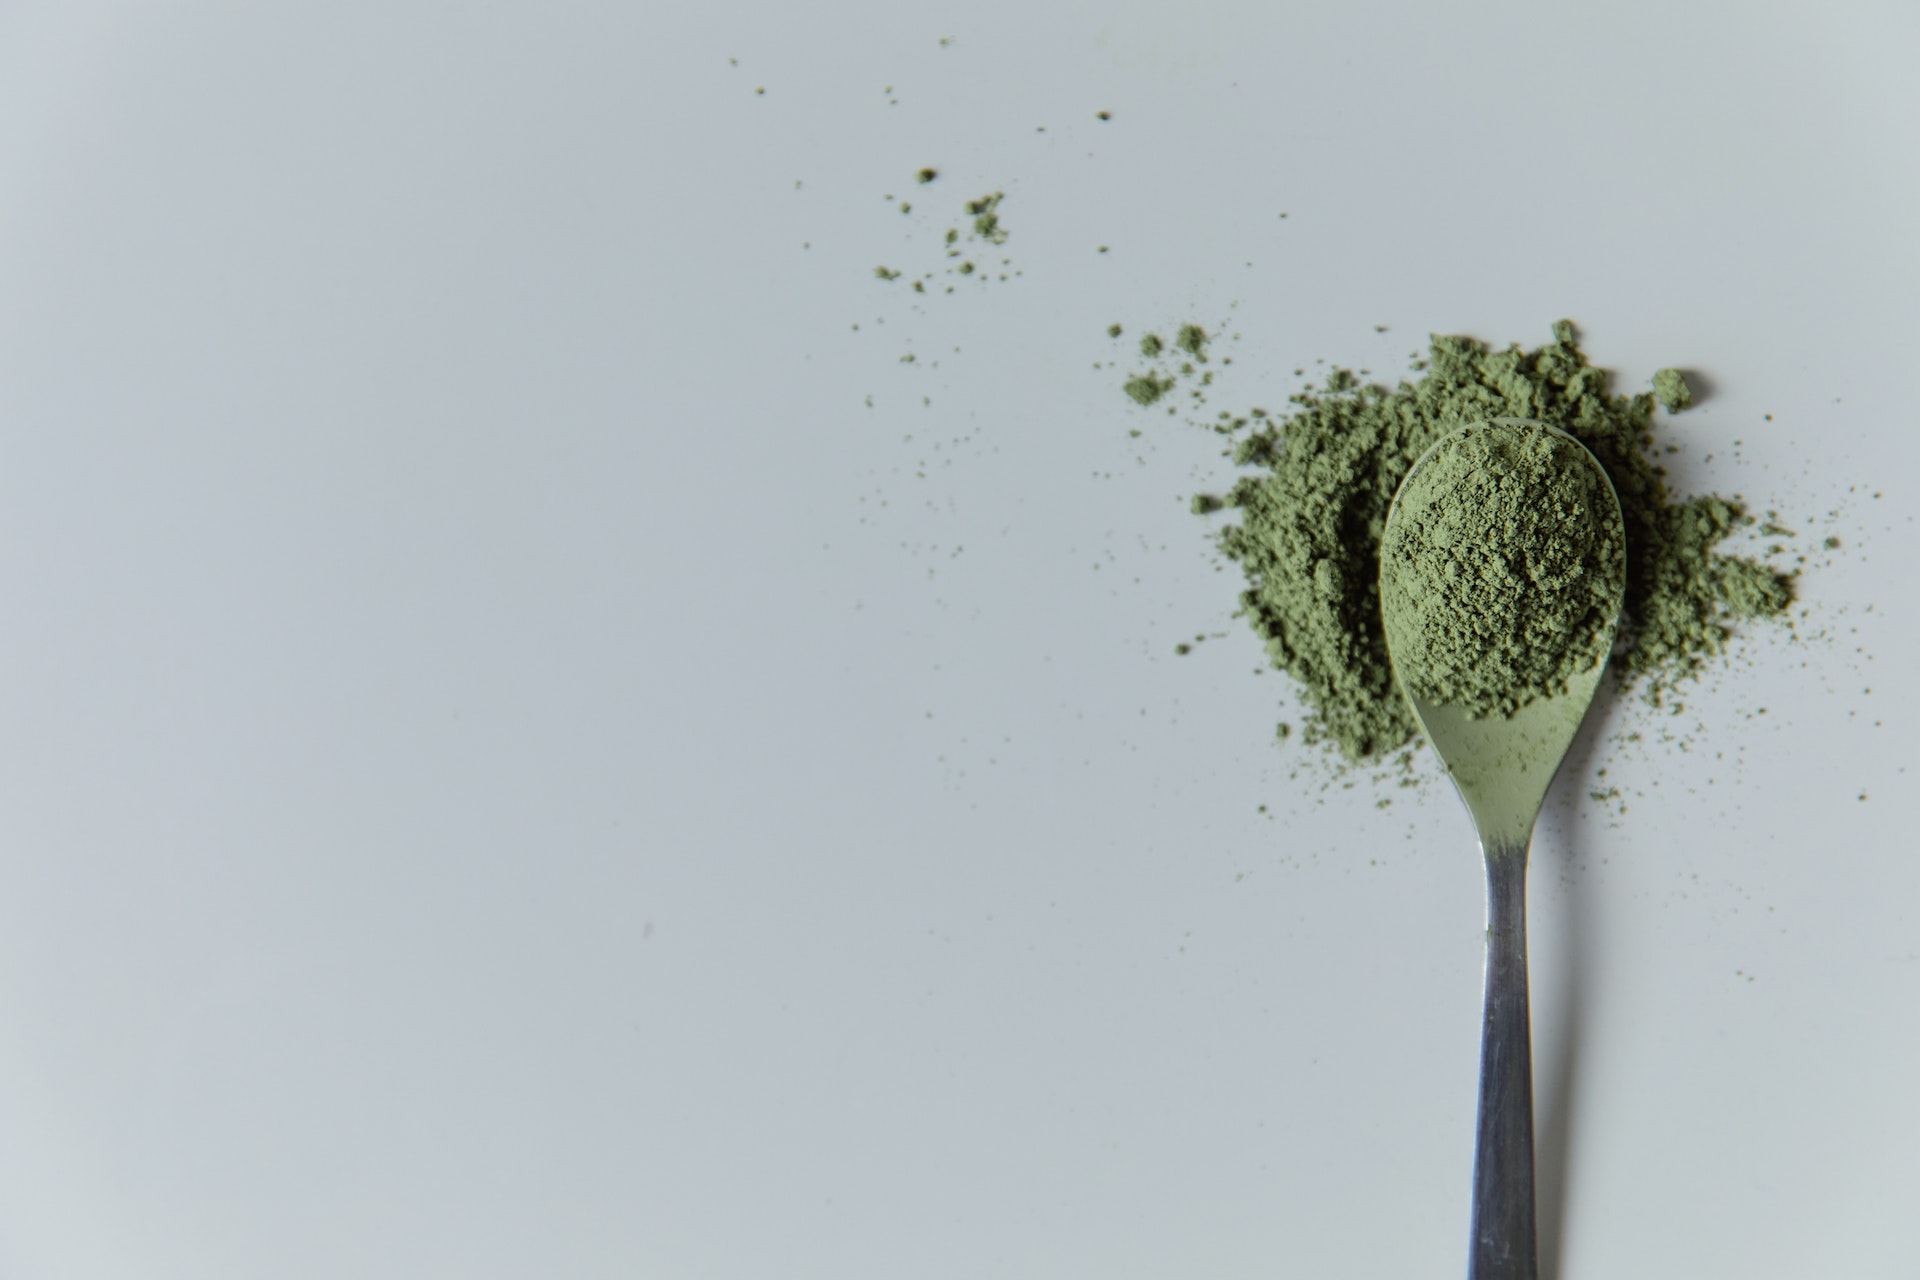 7 Tips To Select The Best Kratom For Sleep And Relaxation